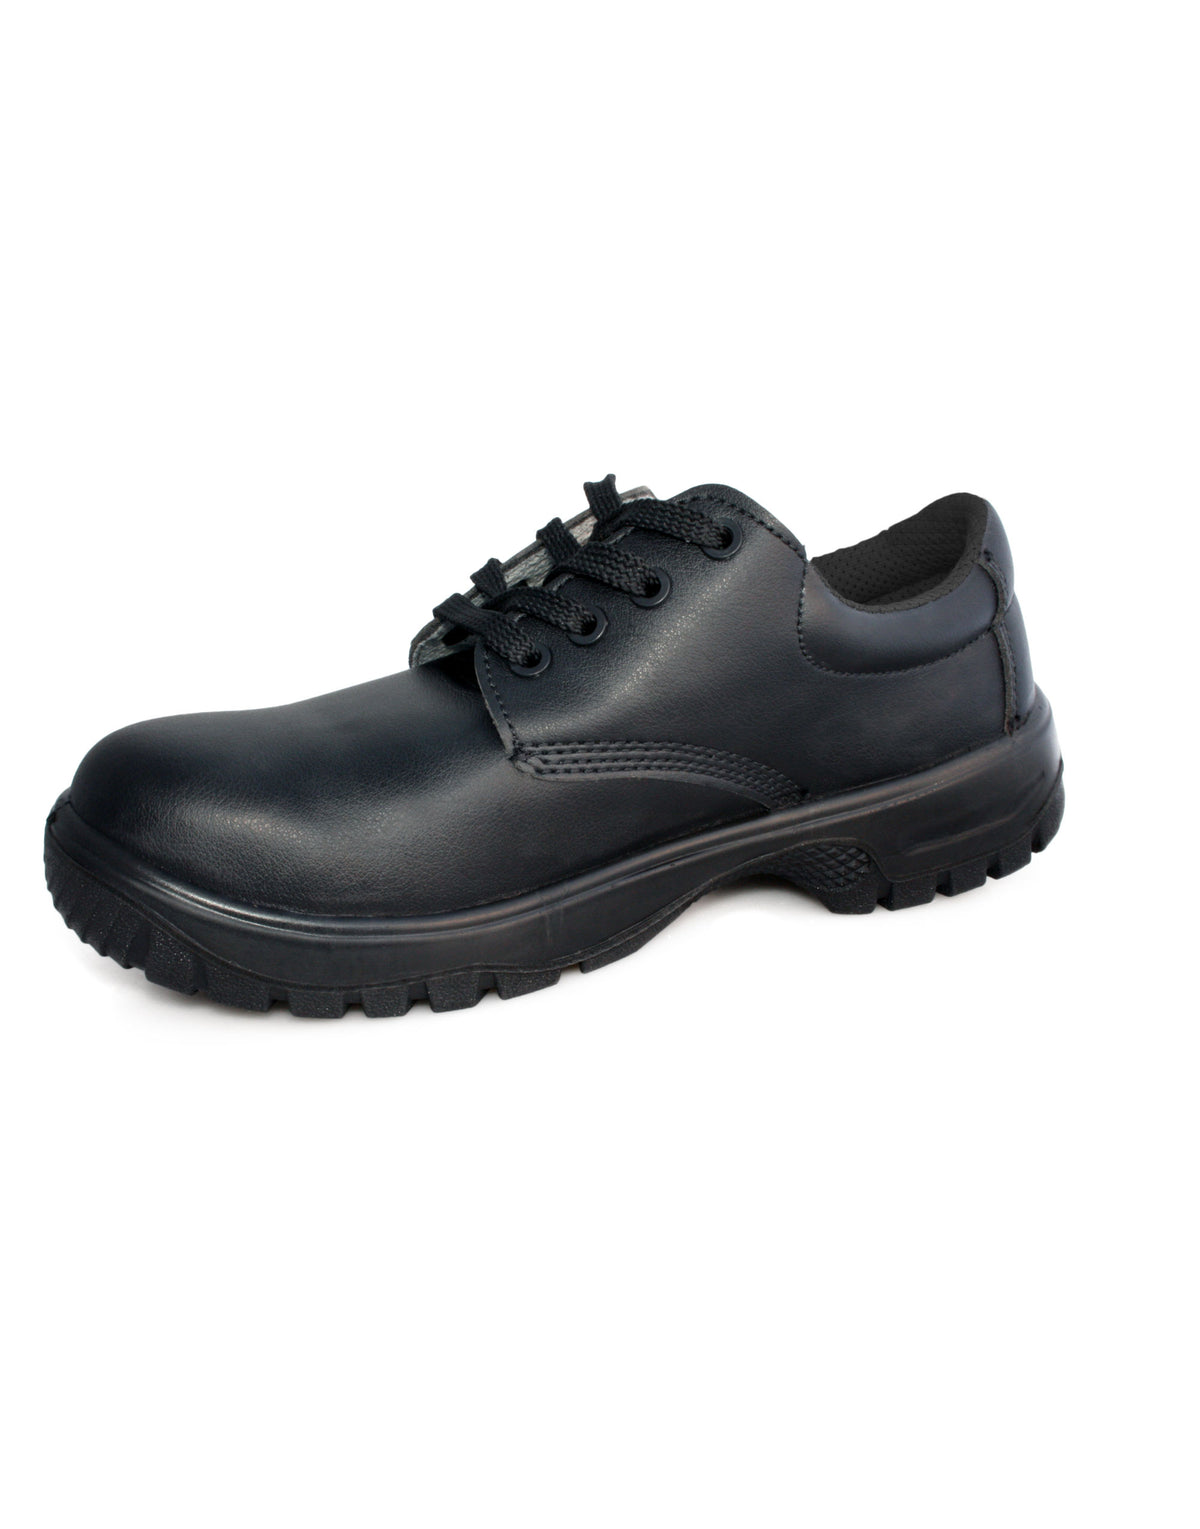 Dennys Comfort Grip Lace up Safety Shoe